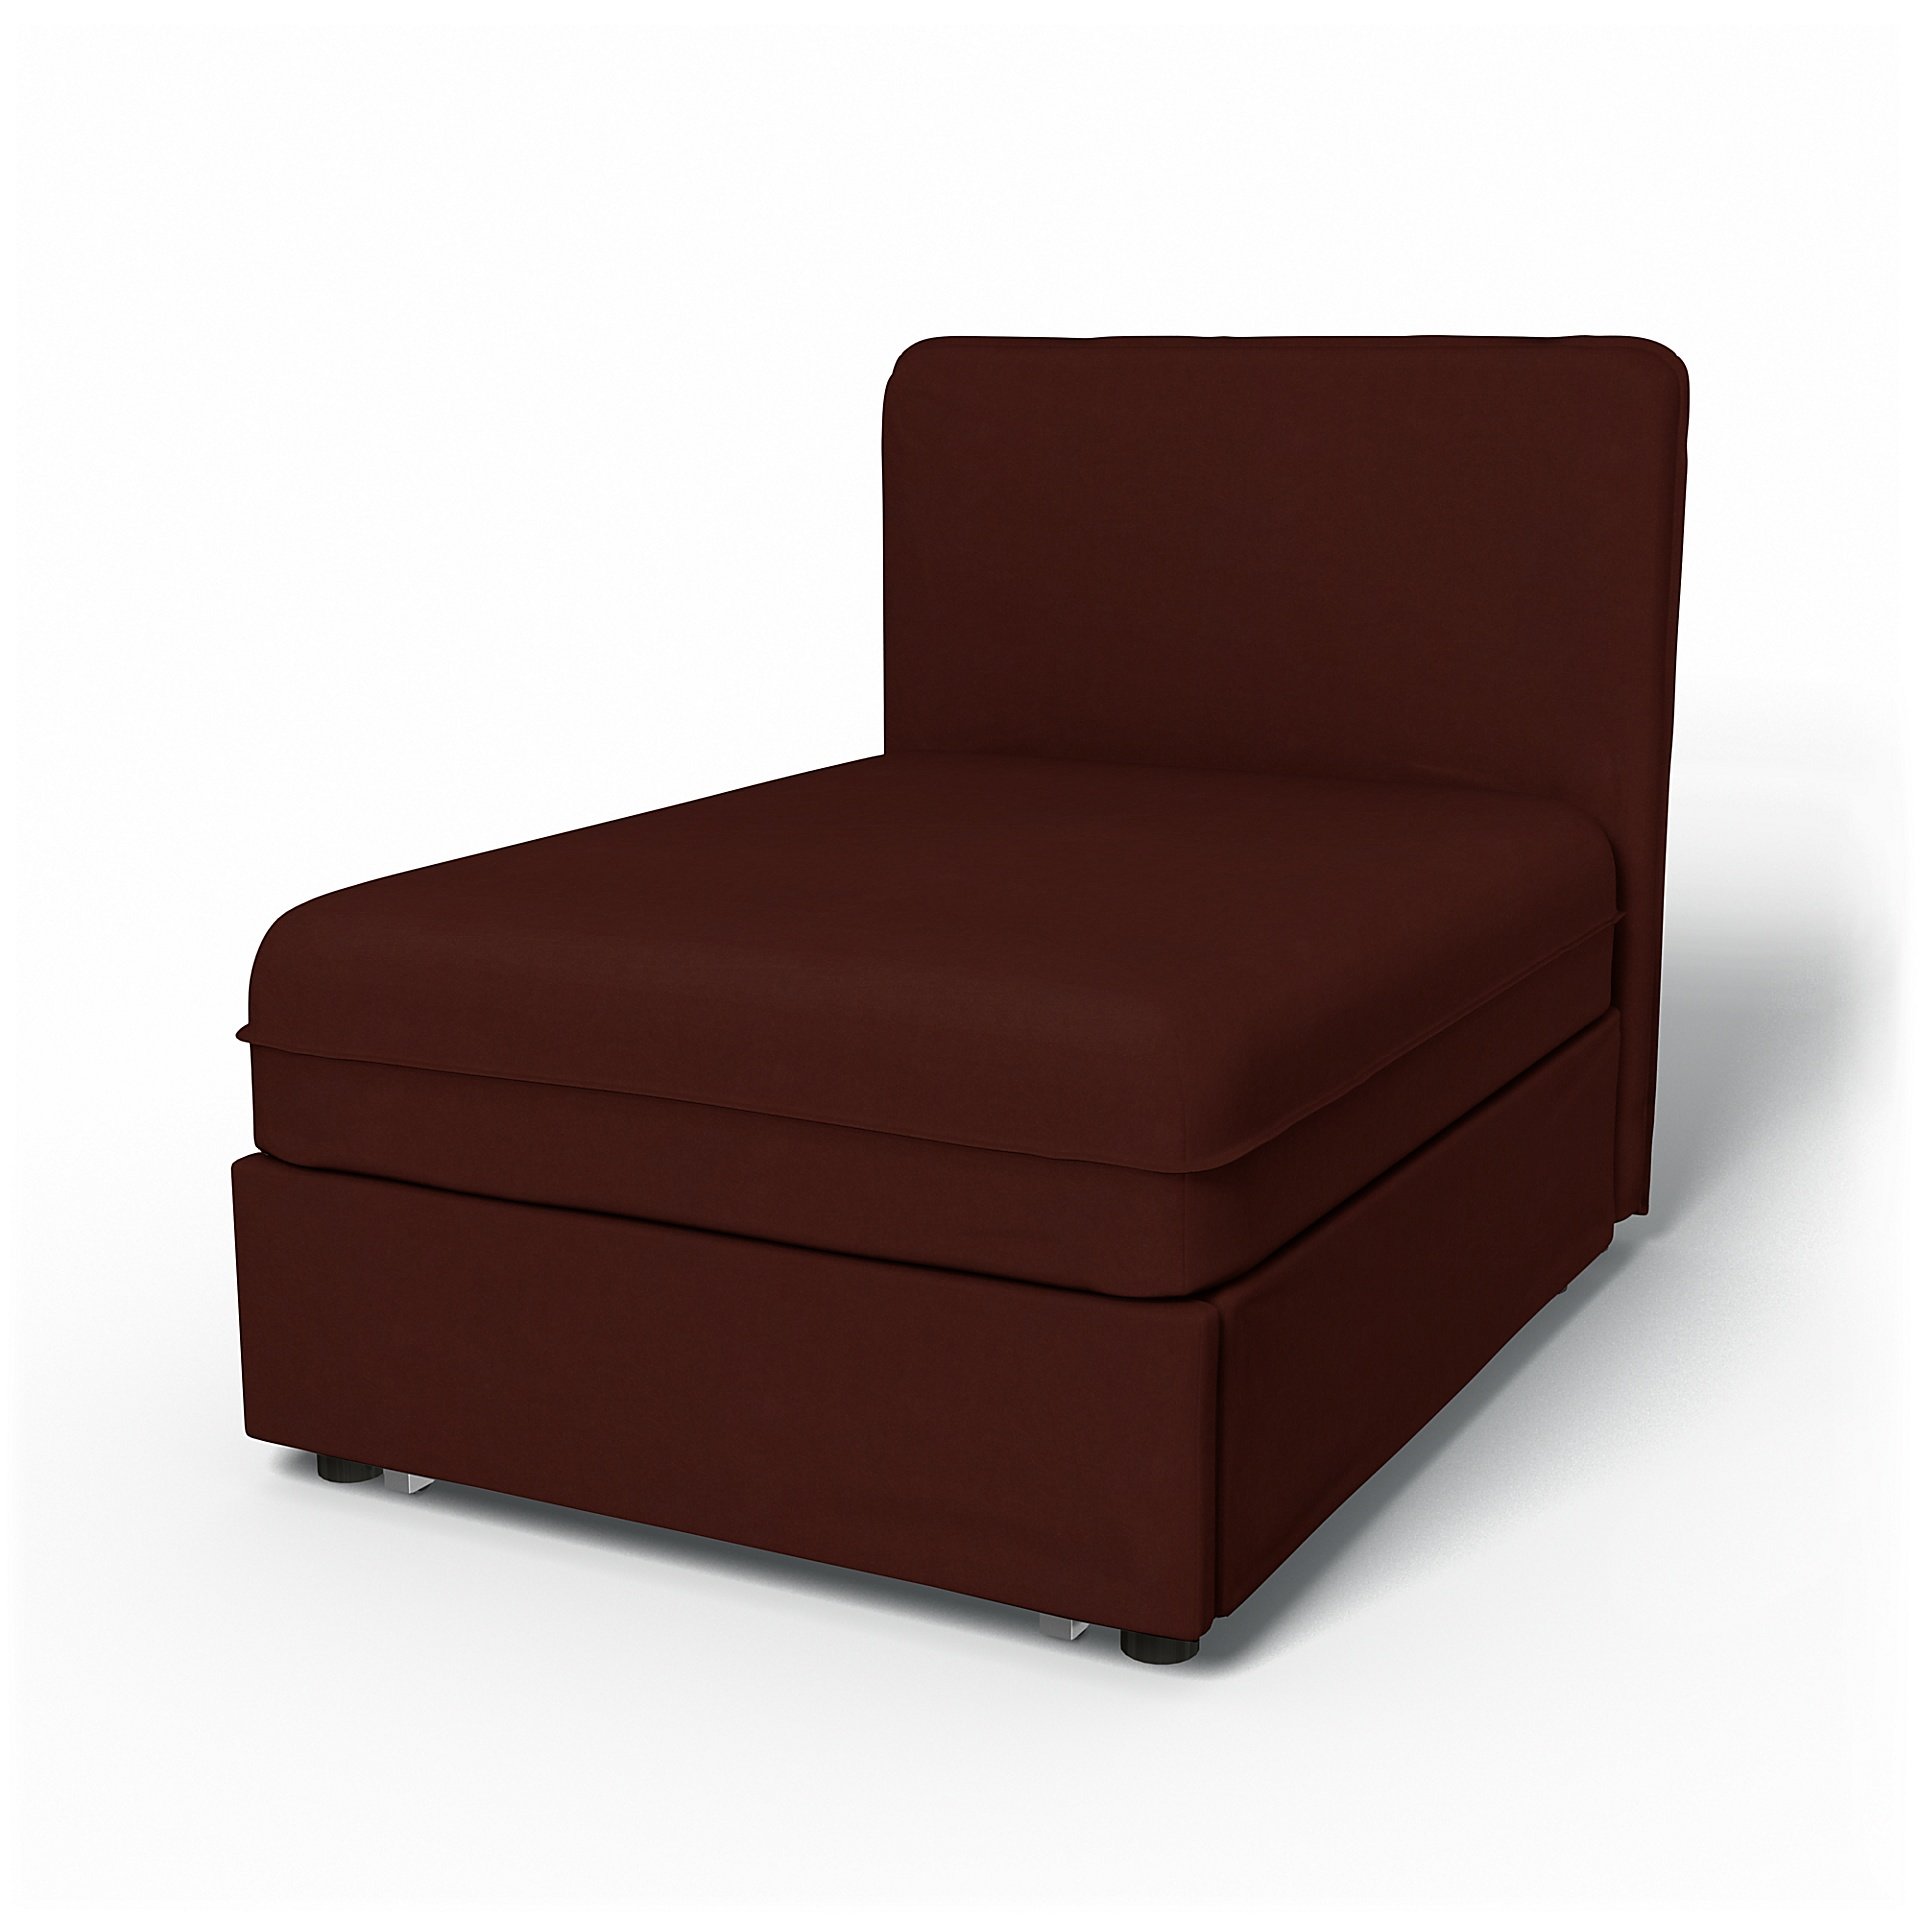 IKEA - Vallentuna Seat Module with Low Back Sofa Bed Cover 80x100 cm 32x39in, Ground Coffee, Velvet 